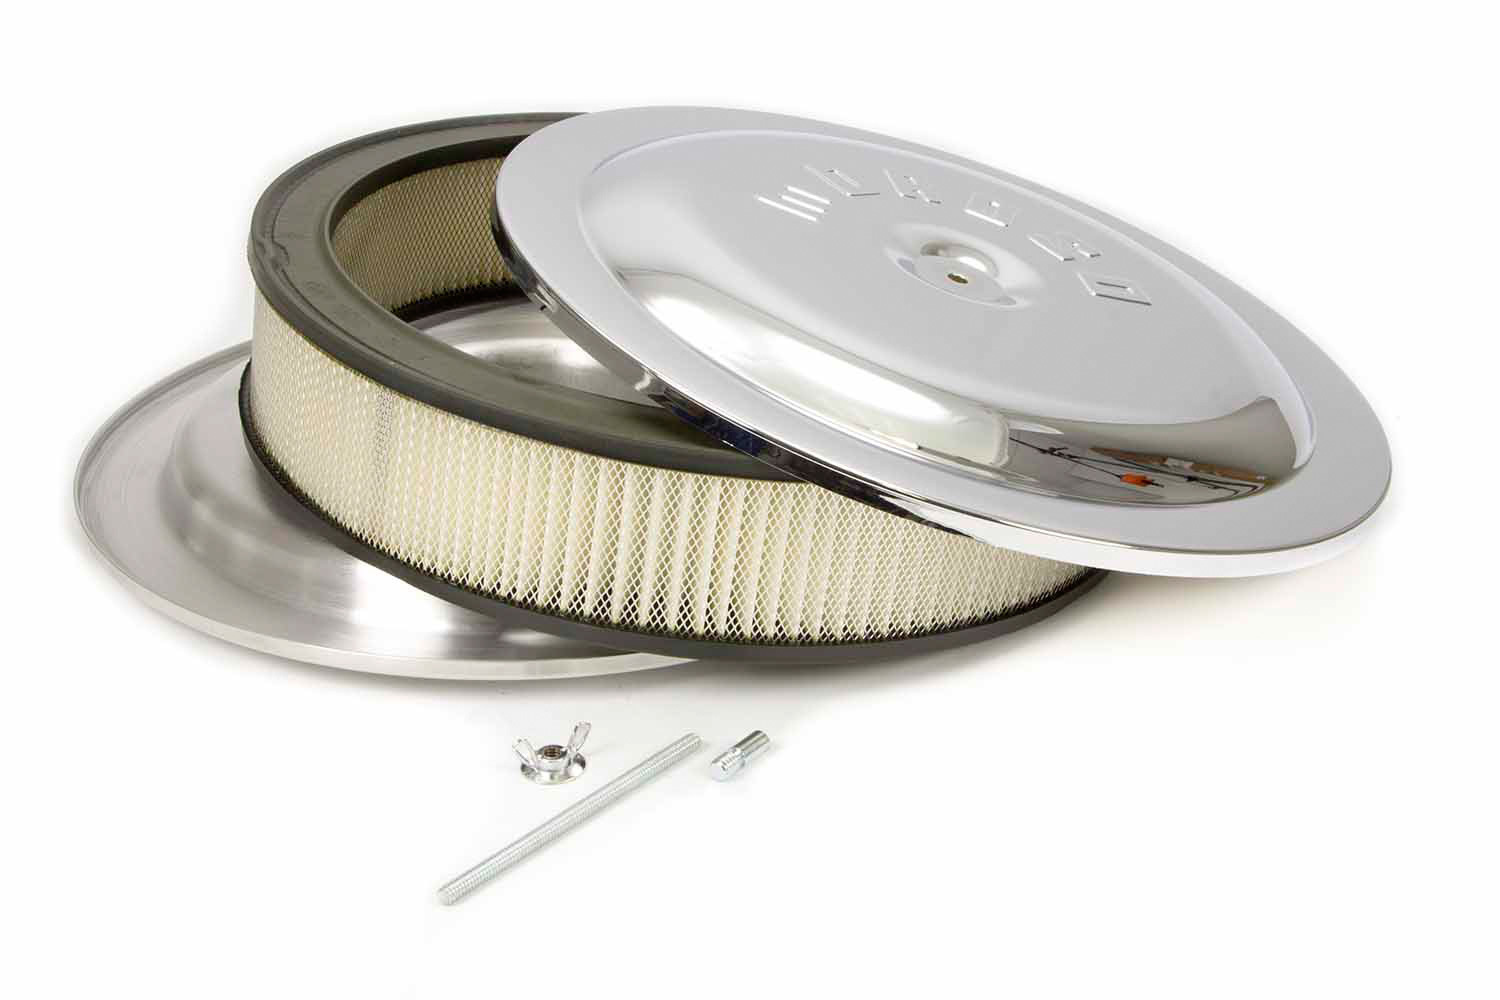 Moroso 65913 Air Cleaner Assembly, 14 in Round, 3 in Element, 5-1/8 in Carb Flange, Raised Base, Aluminum, Chrome, Kit